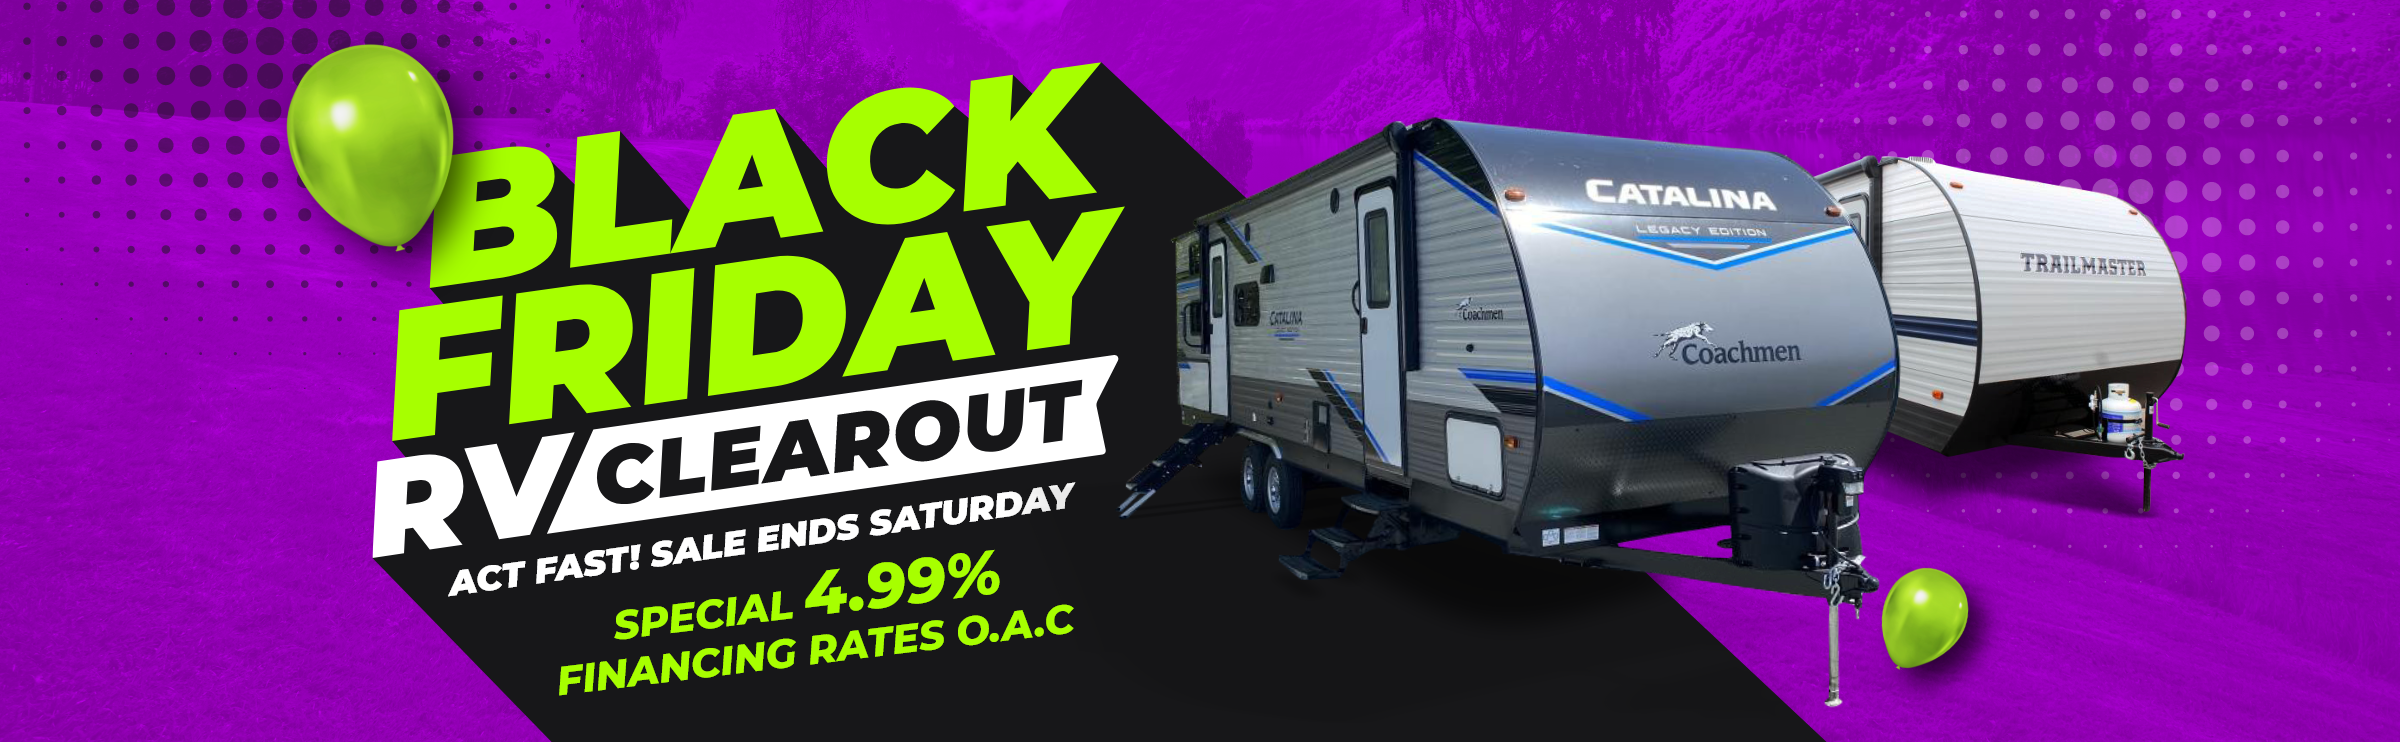 Black Friday RV Clearout